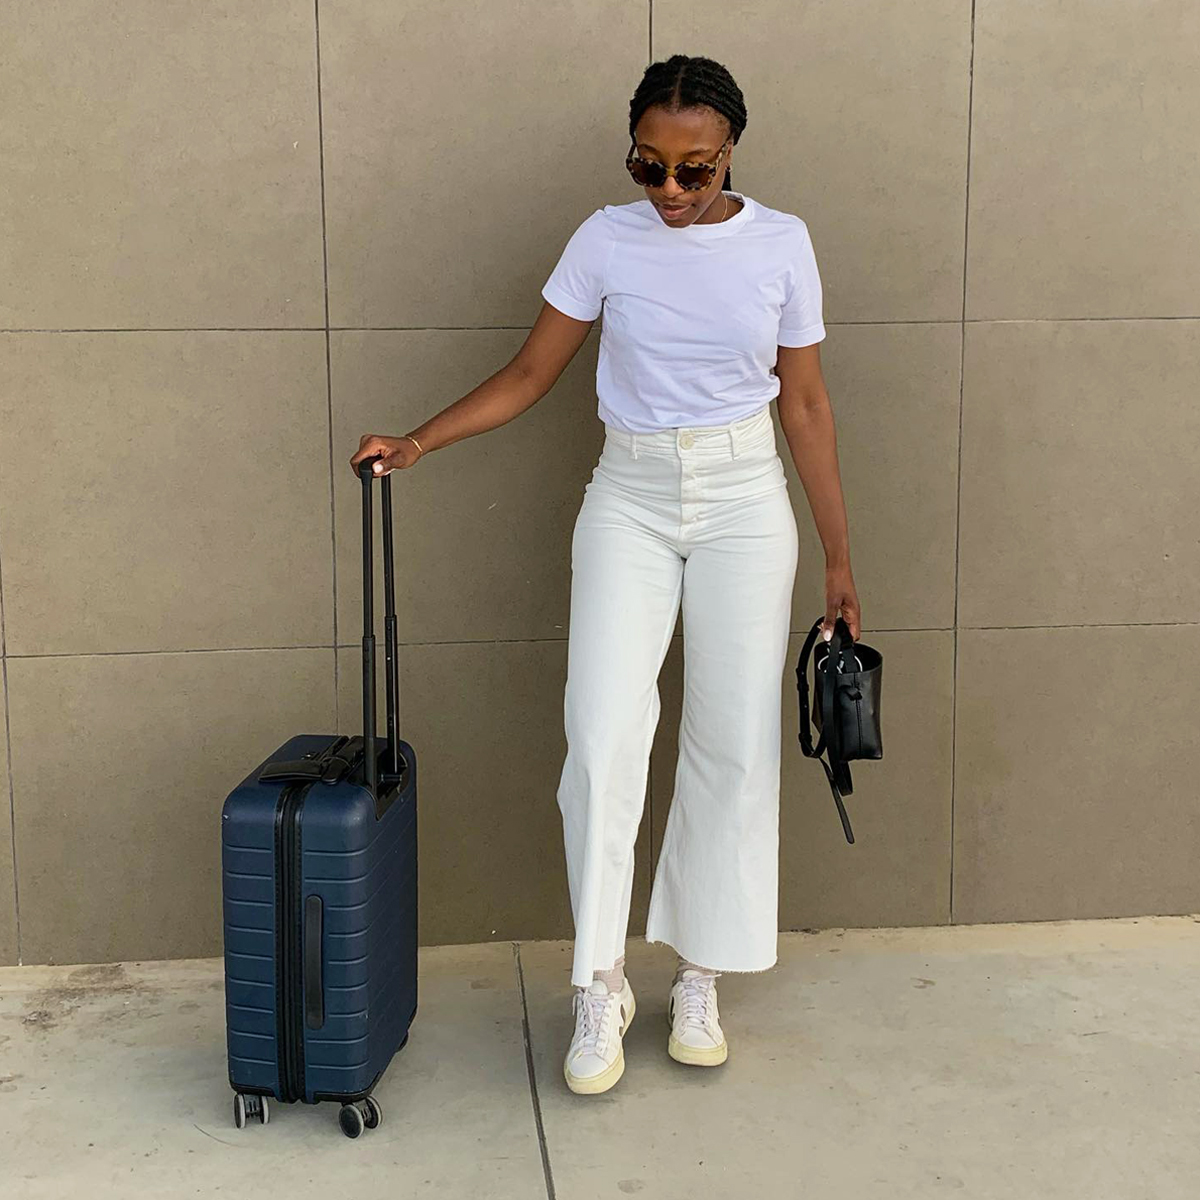 10 Perfect Travel Outfits That Will Keep You Comfy And Stylish